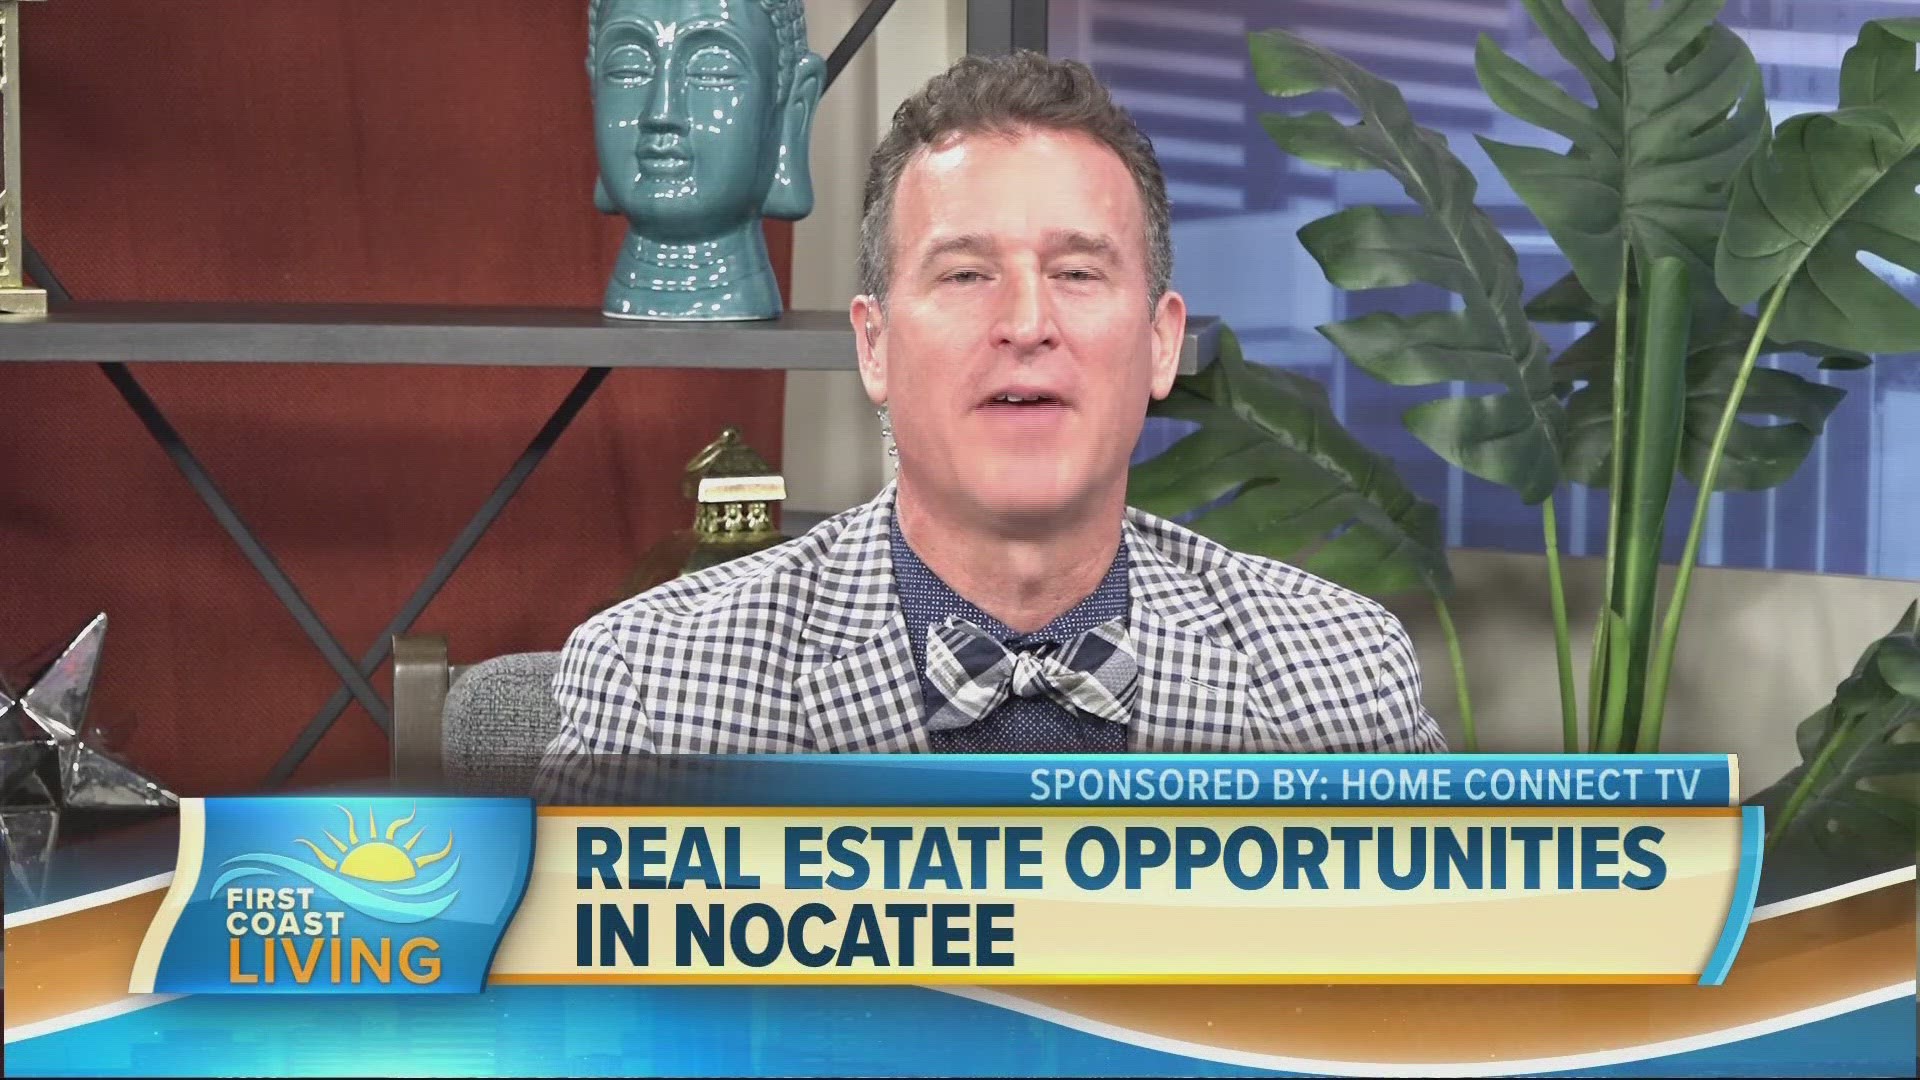 From growing families to retirees, there is a home for everyone at Nocatee. George Ballou, a Broker Associate at Engel & Völkers joins the show.